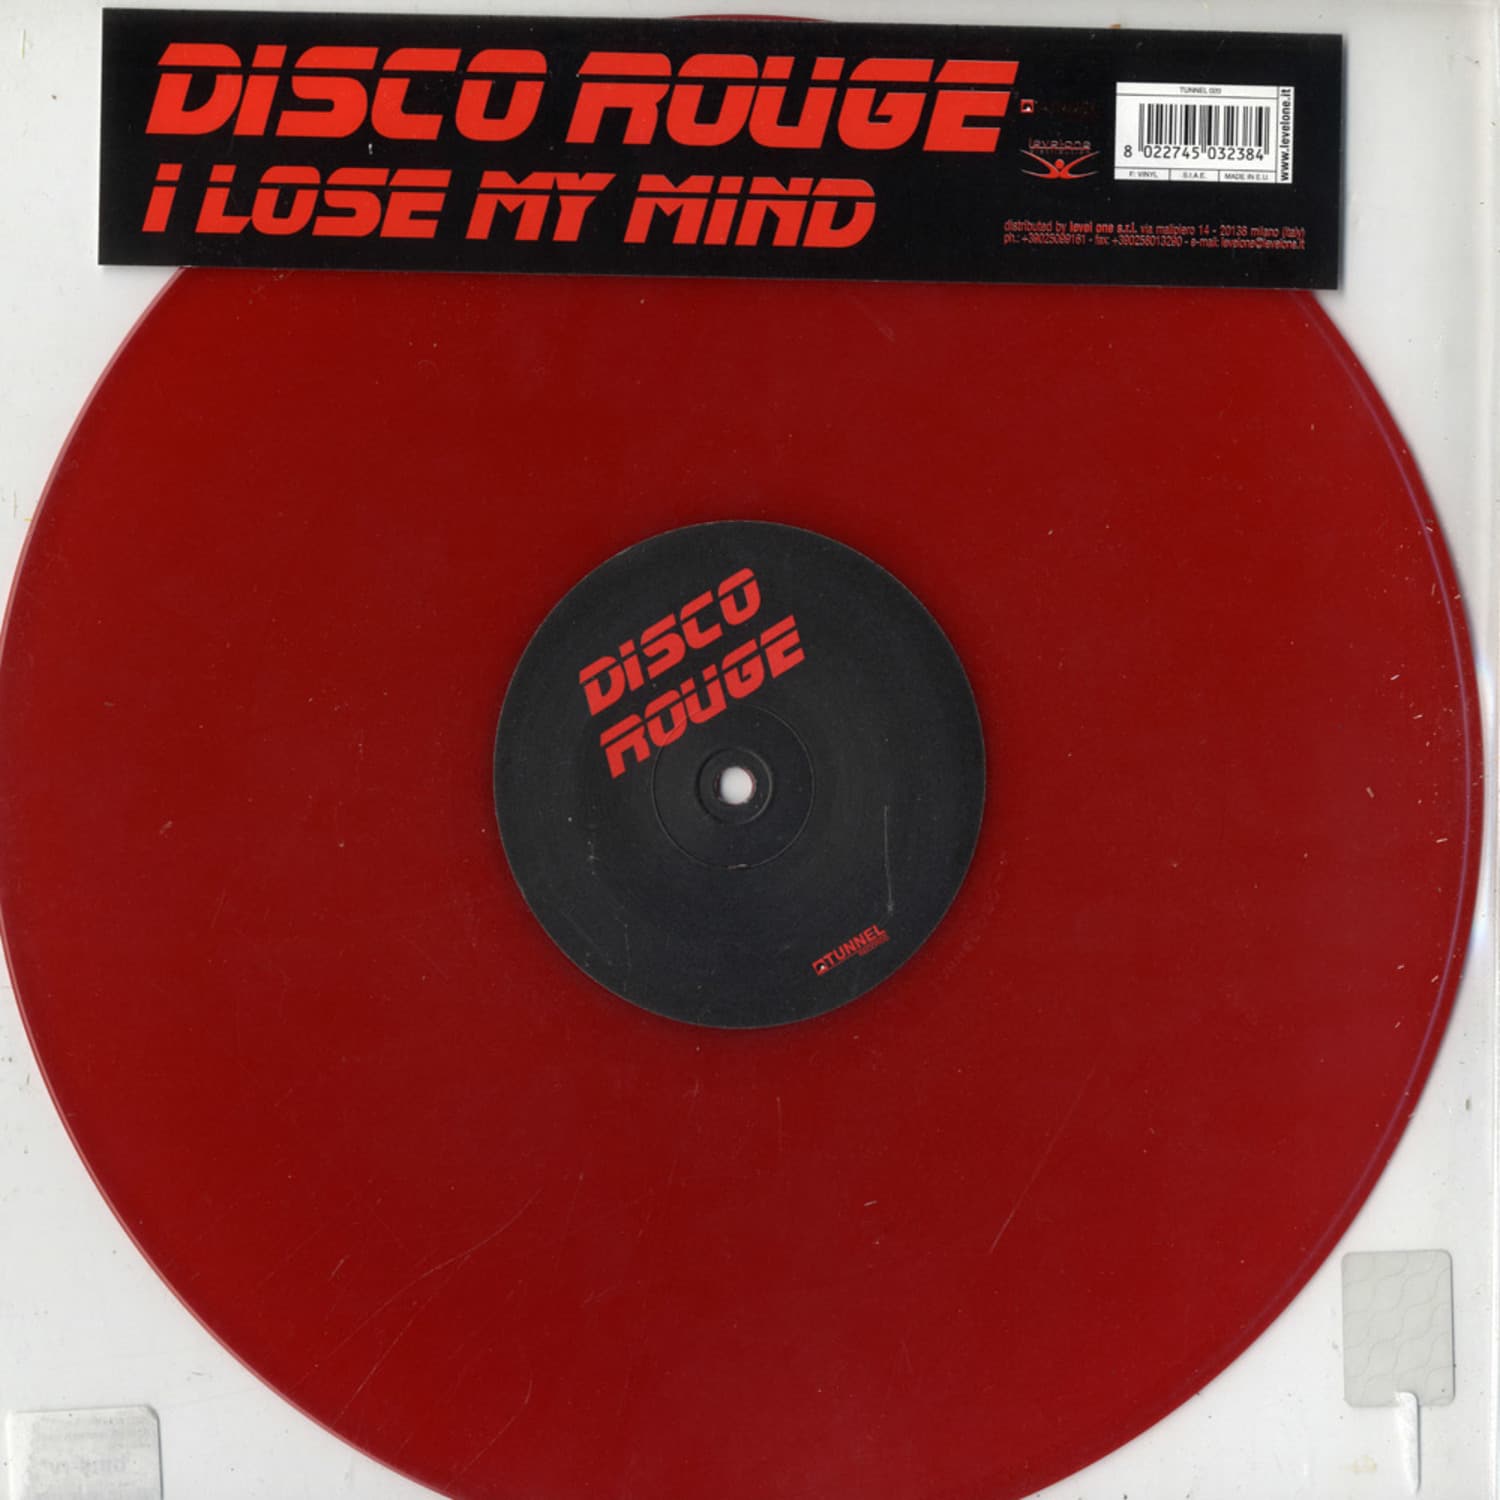 Disco Rouge - I LOST MY MIND RED VINYL